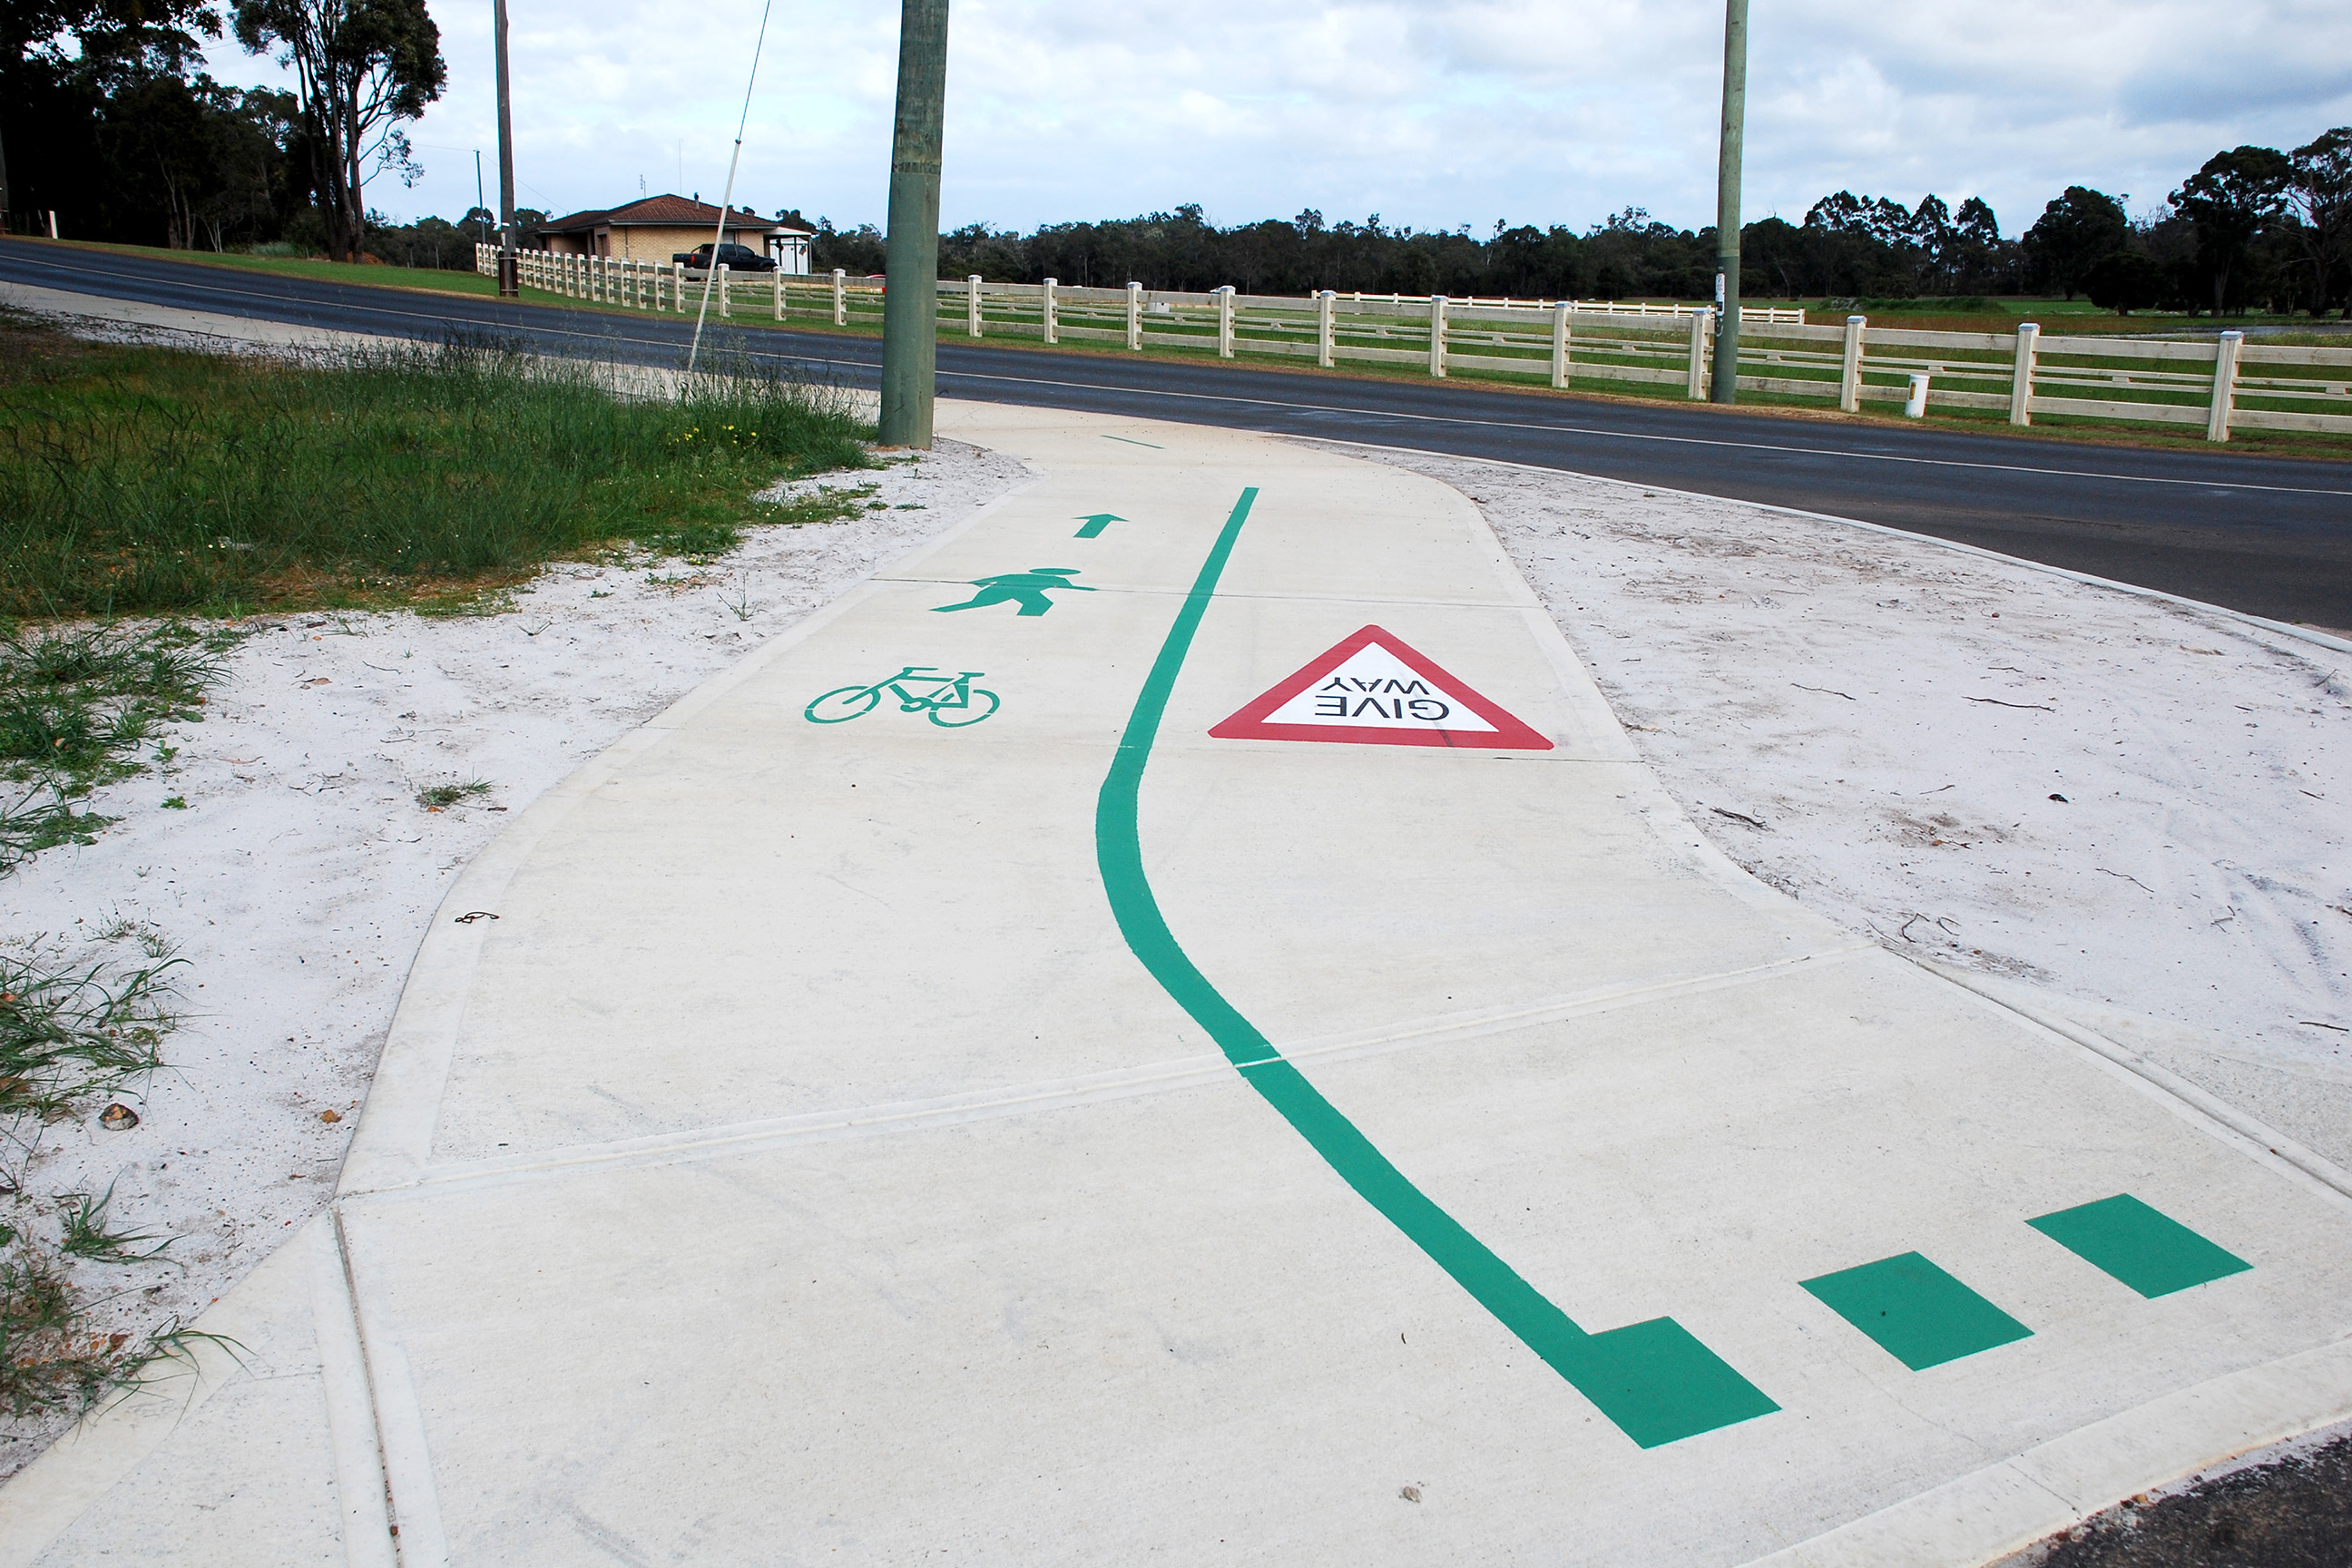 Multi pathway with linemarking for bicycles, pedestrians.